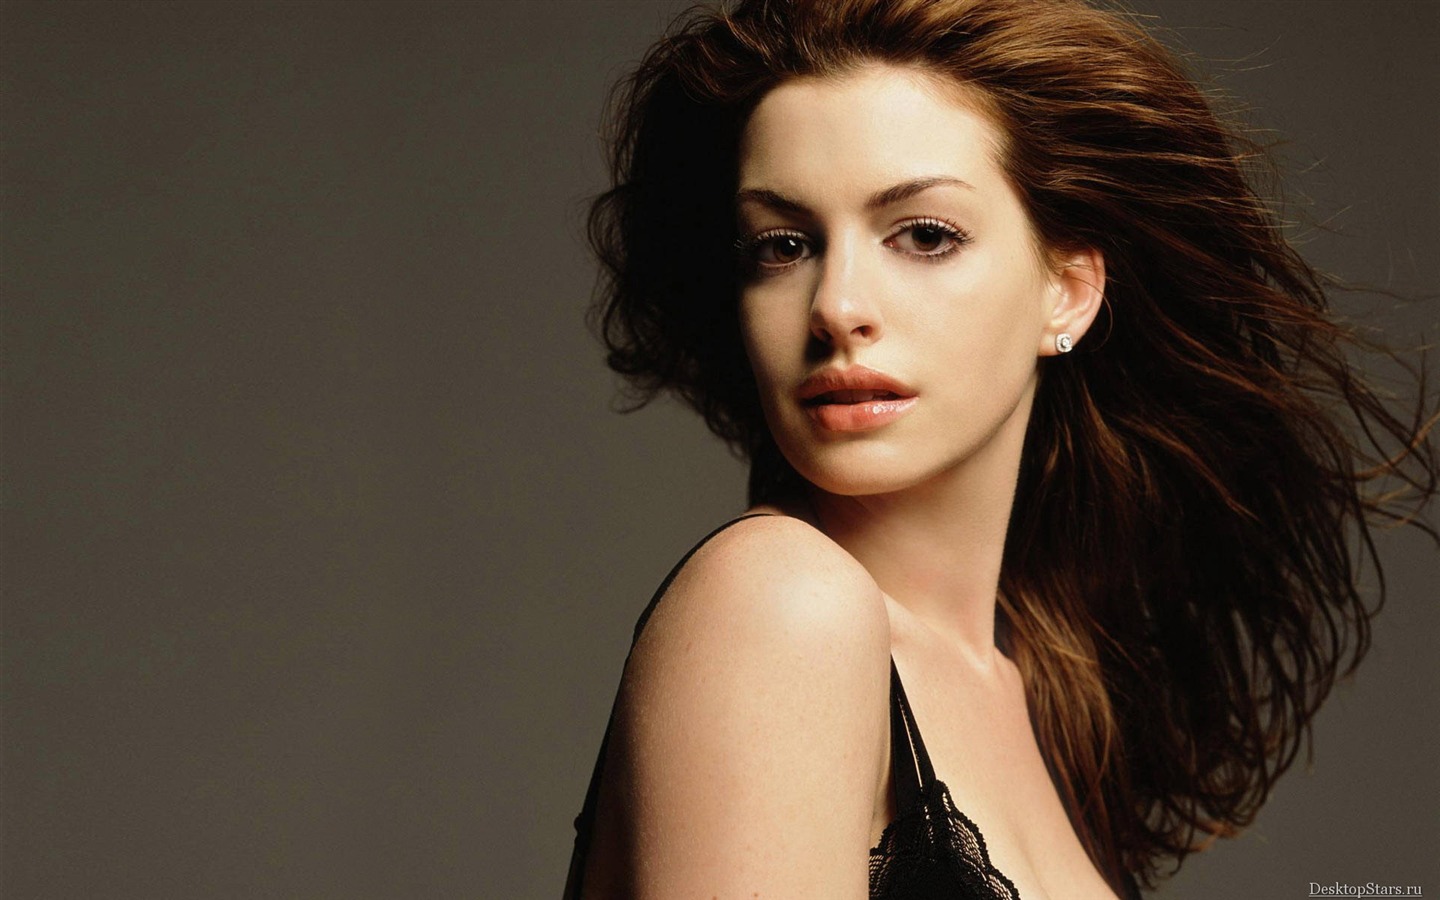 Anne Hathaway #017 - 1440x900 Wallpapers Pictures Photos Images